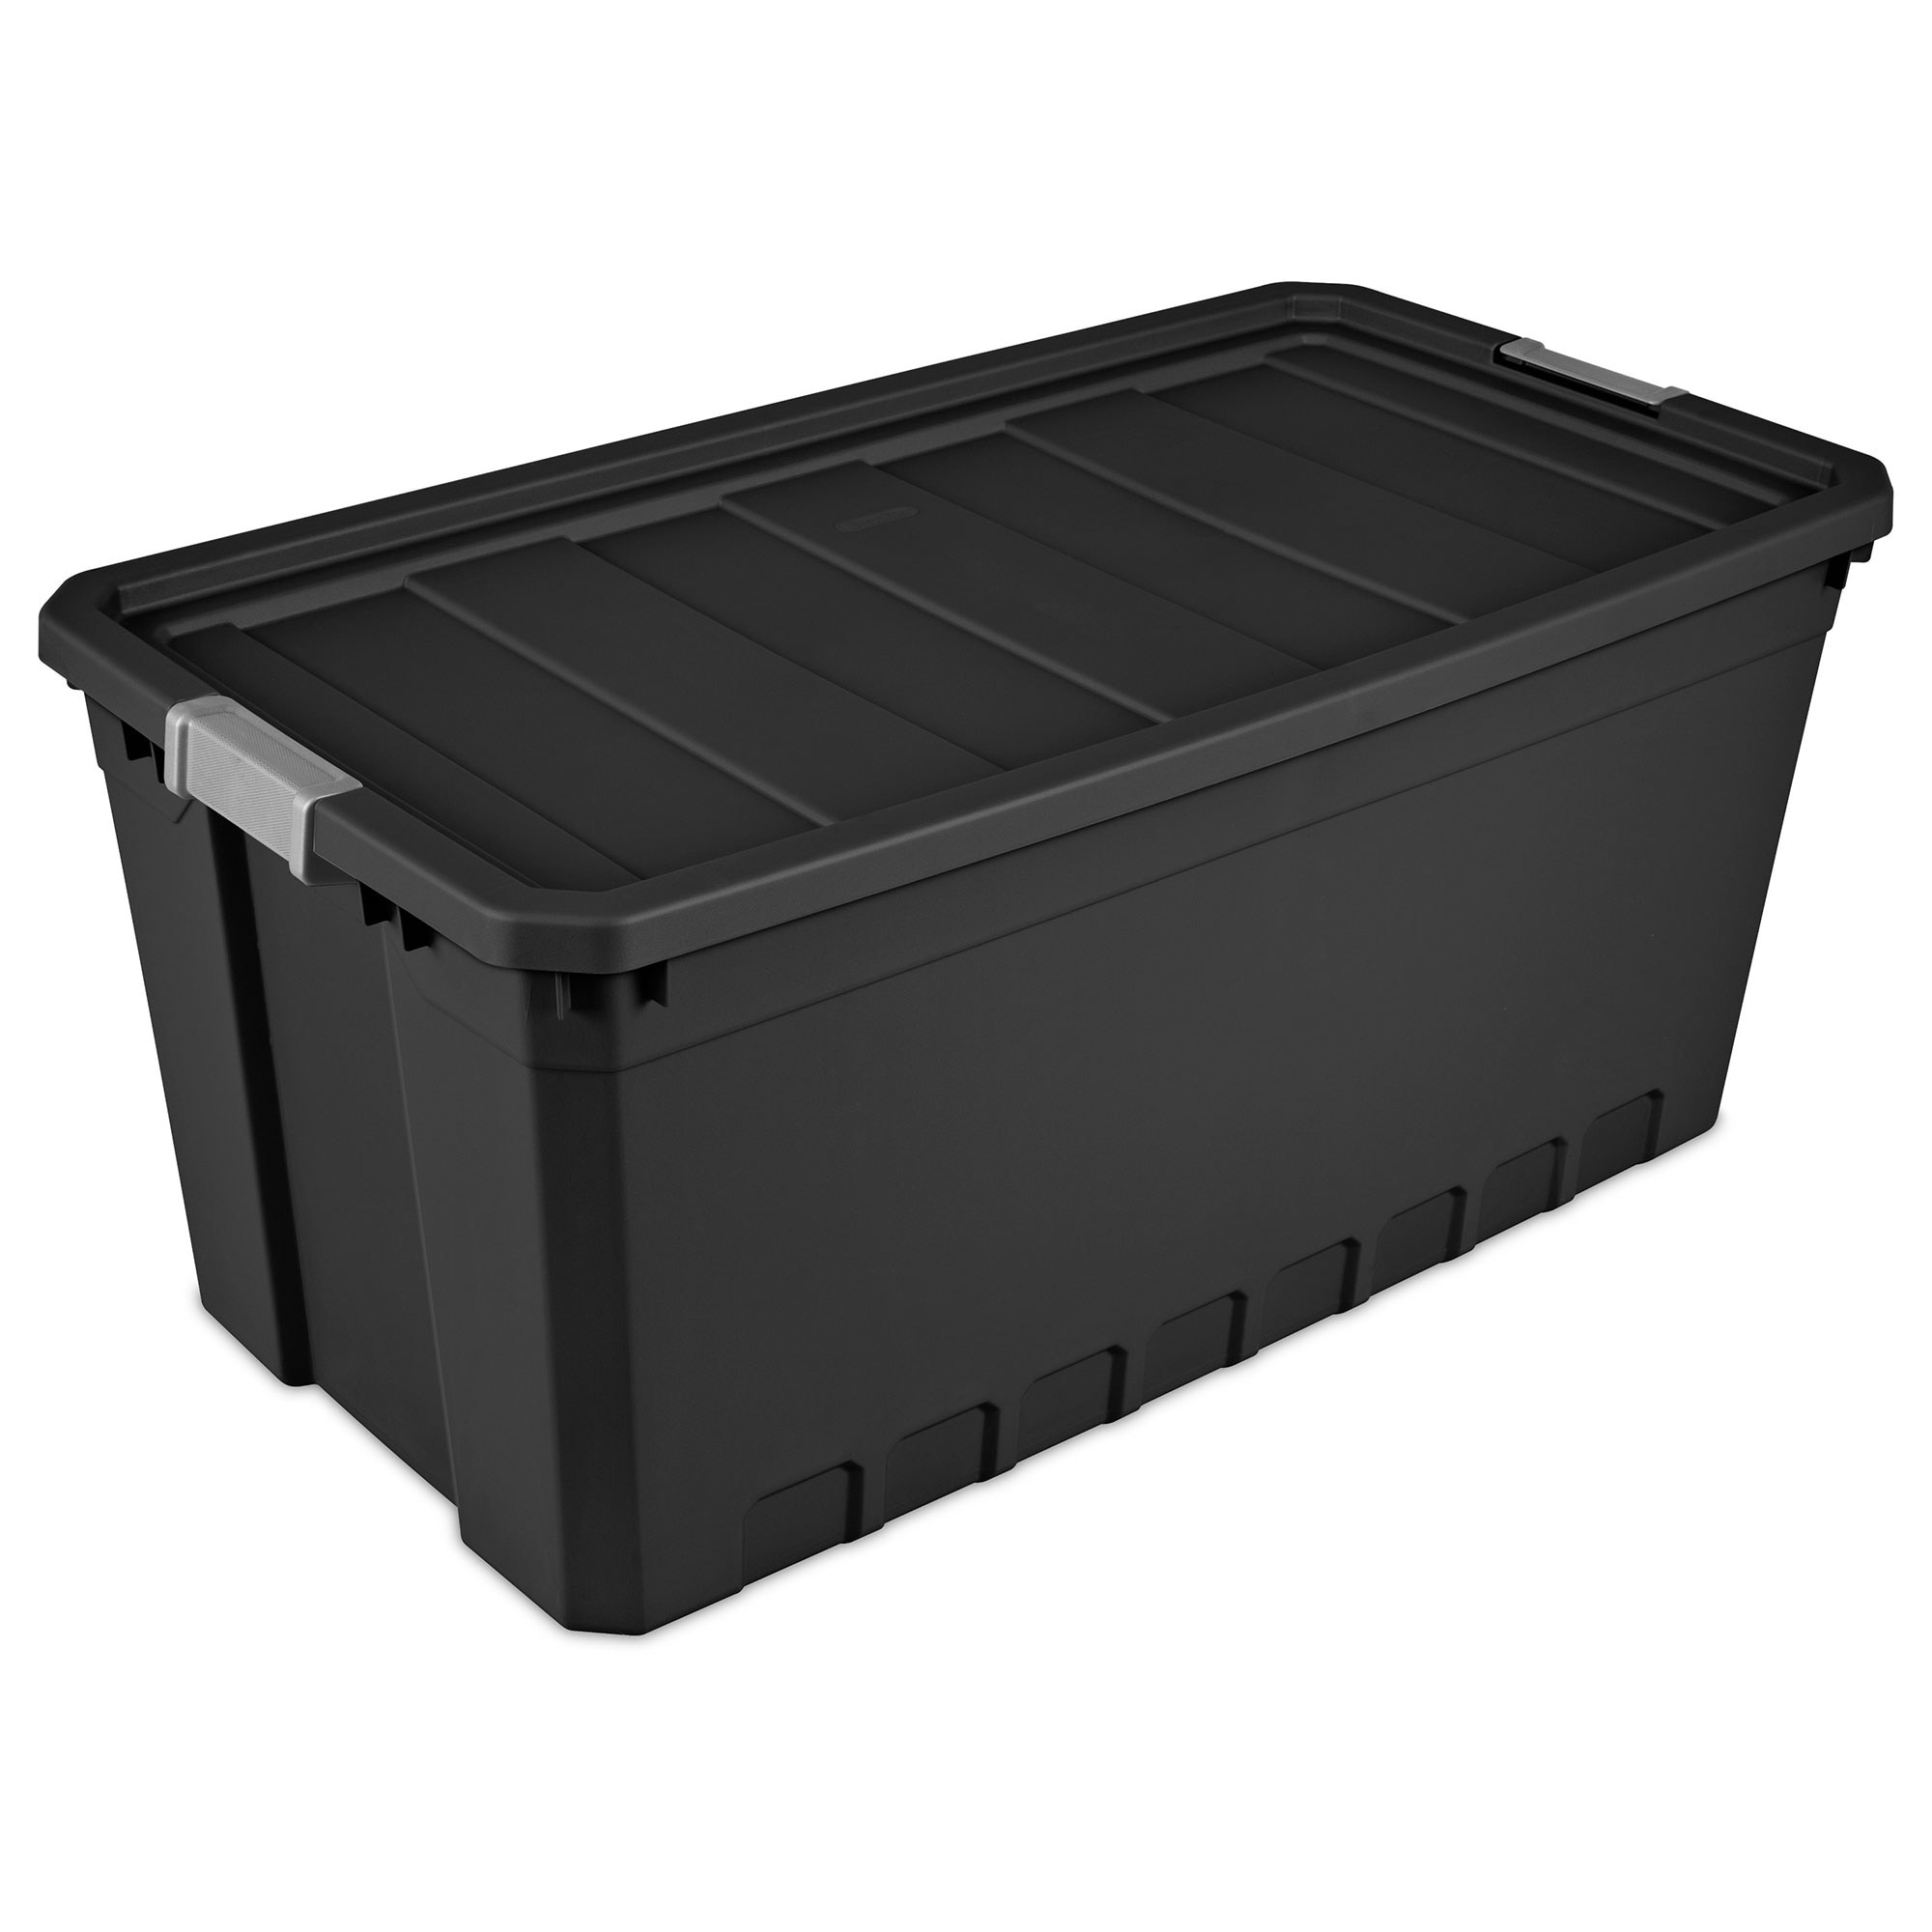 https://ak1.ostkcdn.com/images/products/is/images/direct/f0620f3f000b30f8c5785eba5d12c1d0d30a8ea1/Sterilite-50-Gal-Rugged-Industrial-Stackable-Storage-Tote-w--Lid%2C-Black%2C-3-Pack.jpg